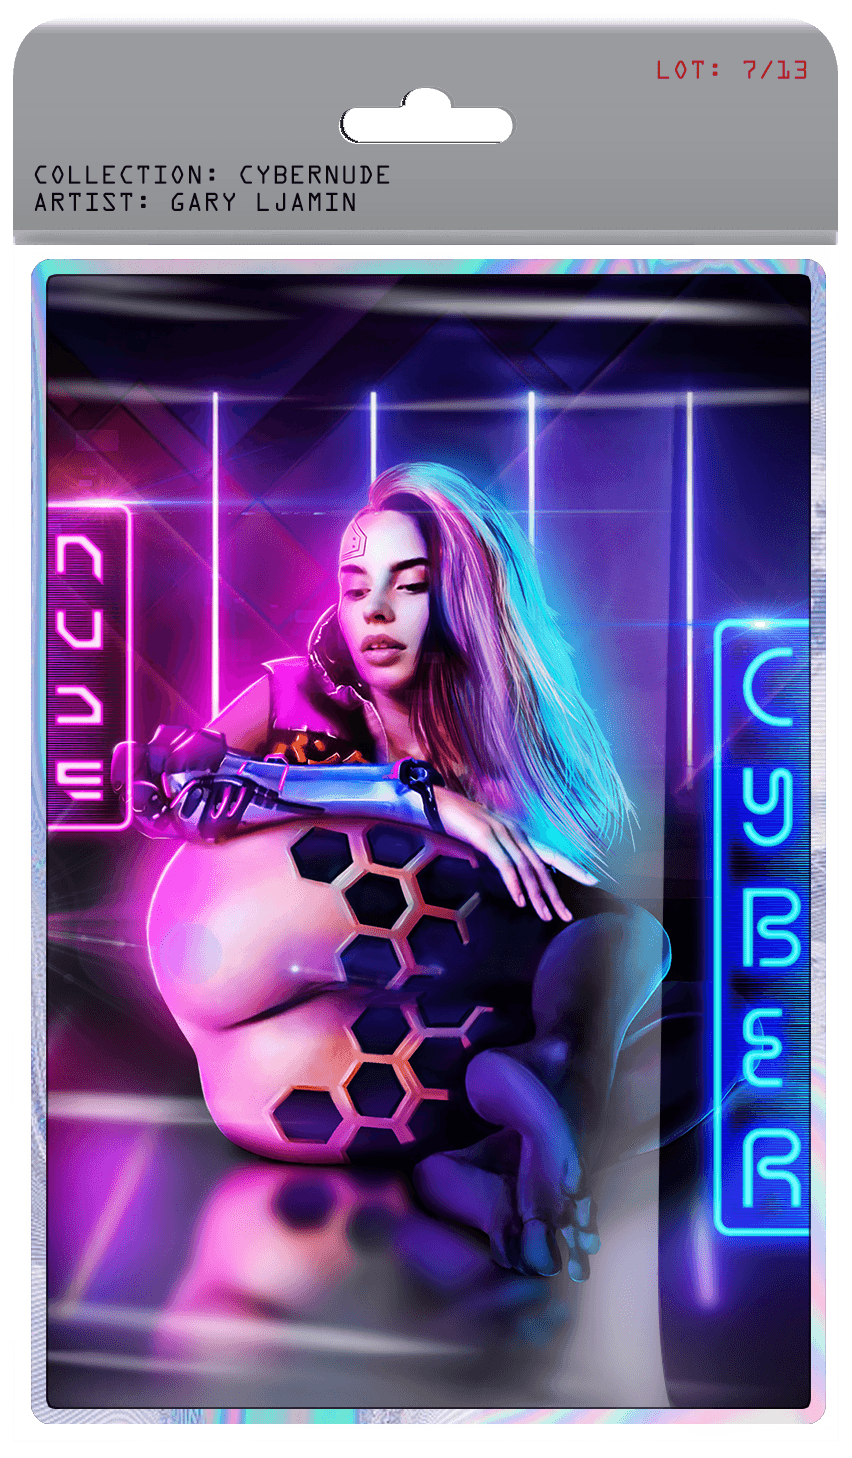 Cybernude playing cards - NFT token - 7 out of 13